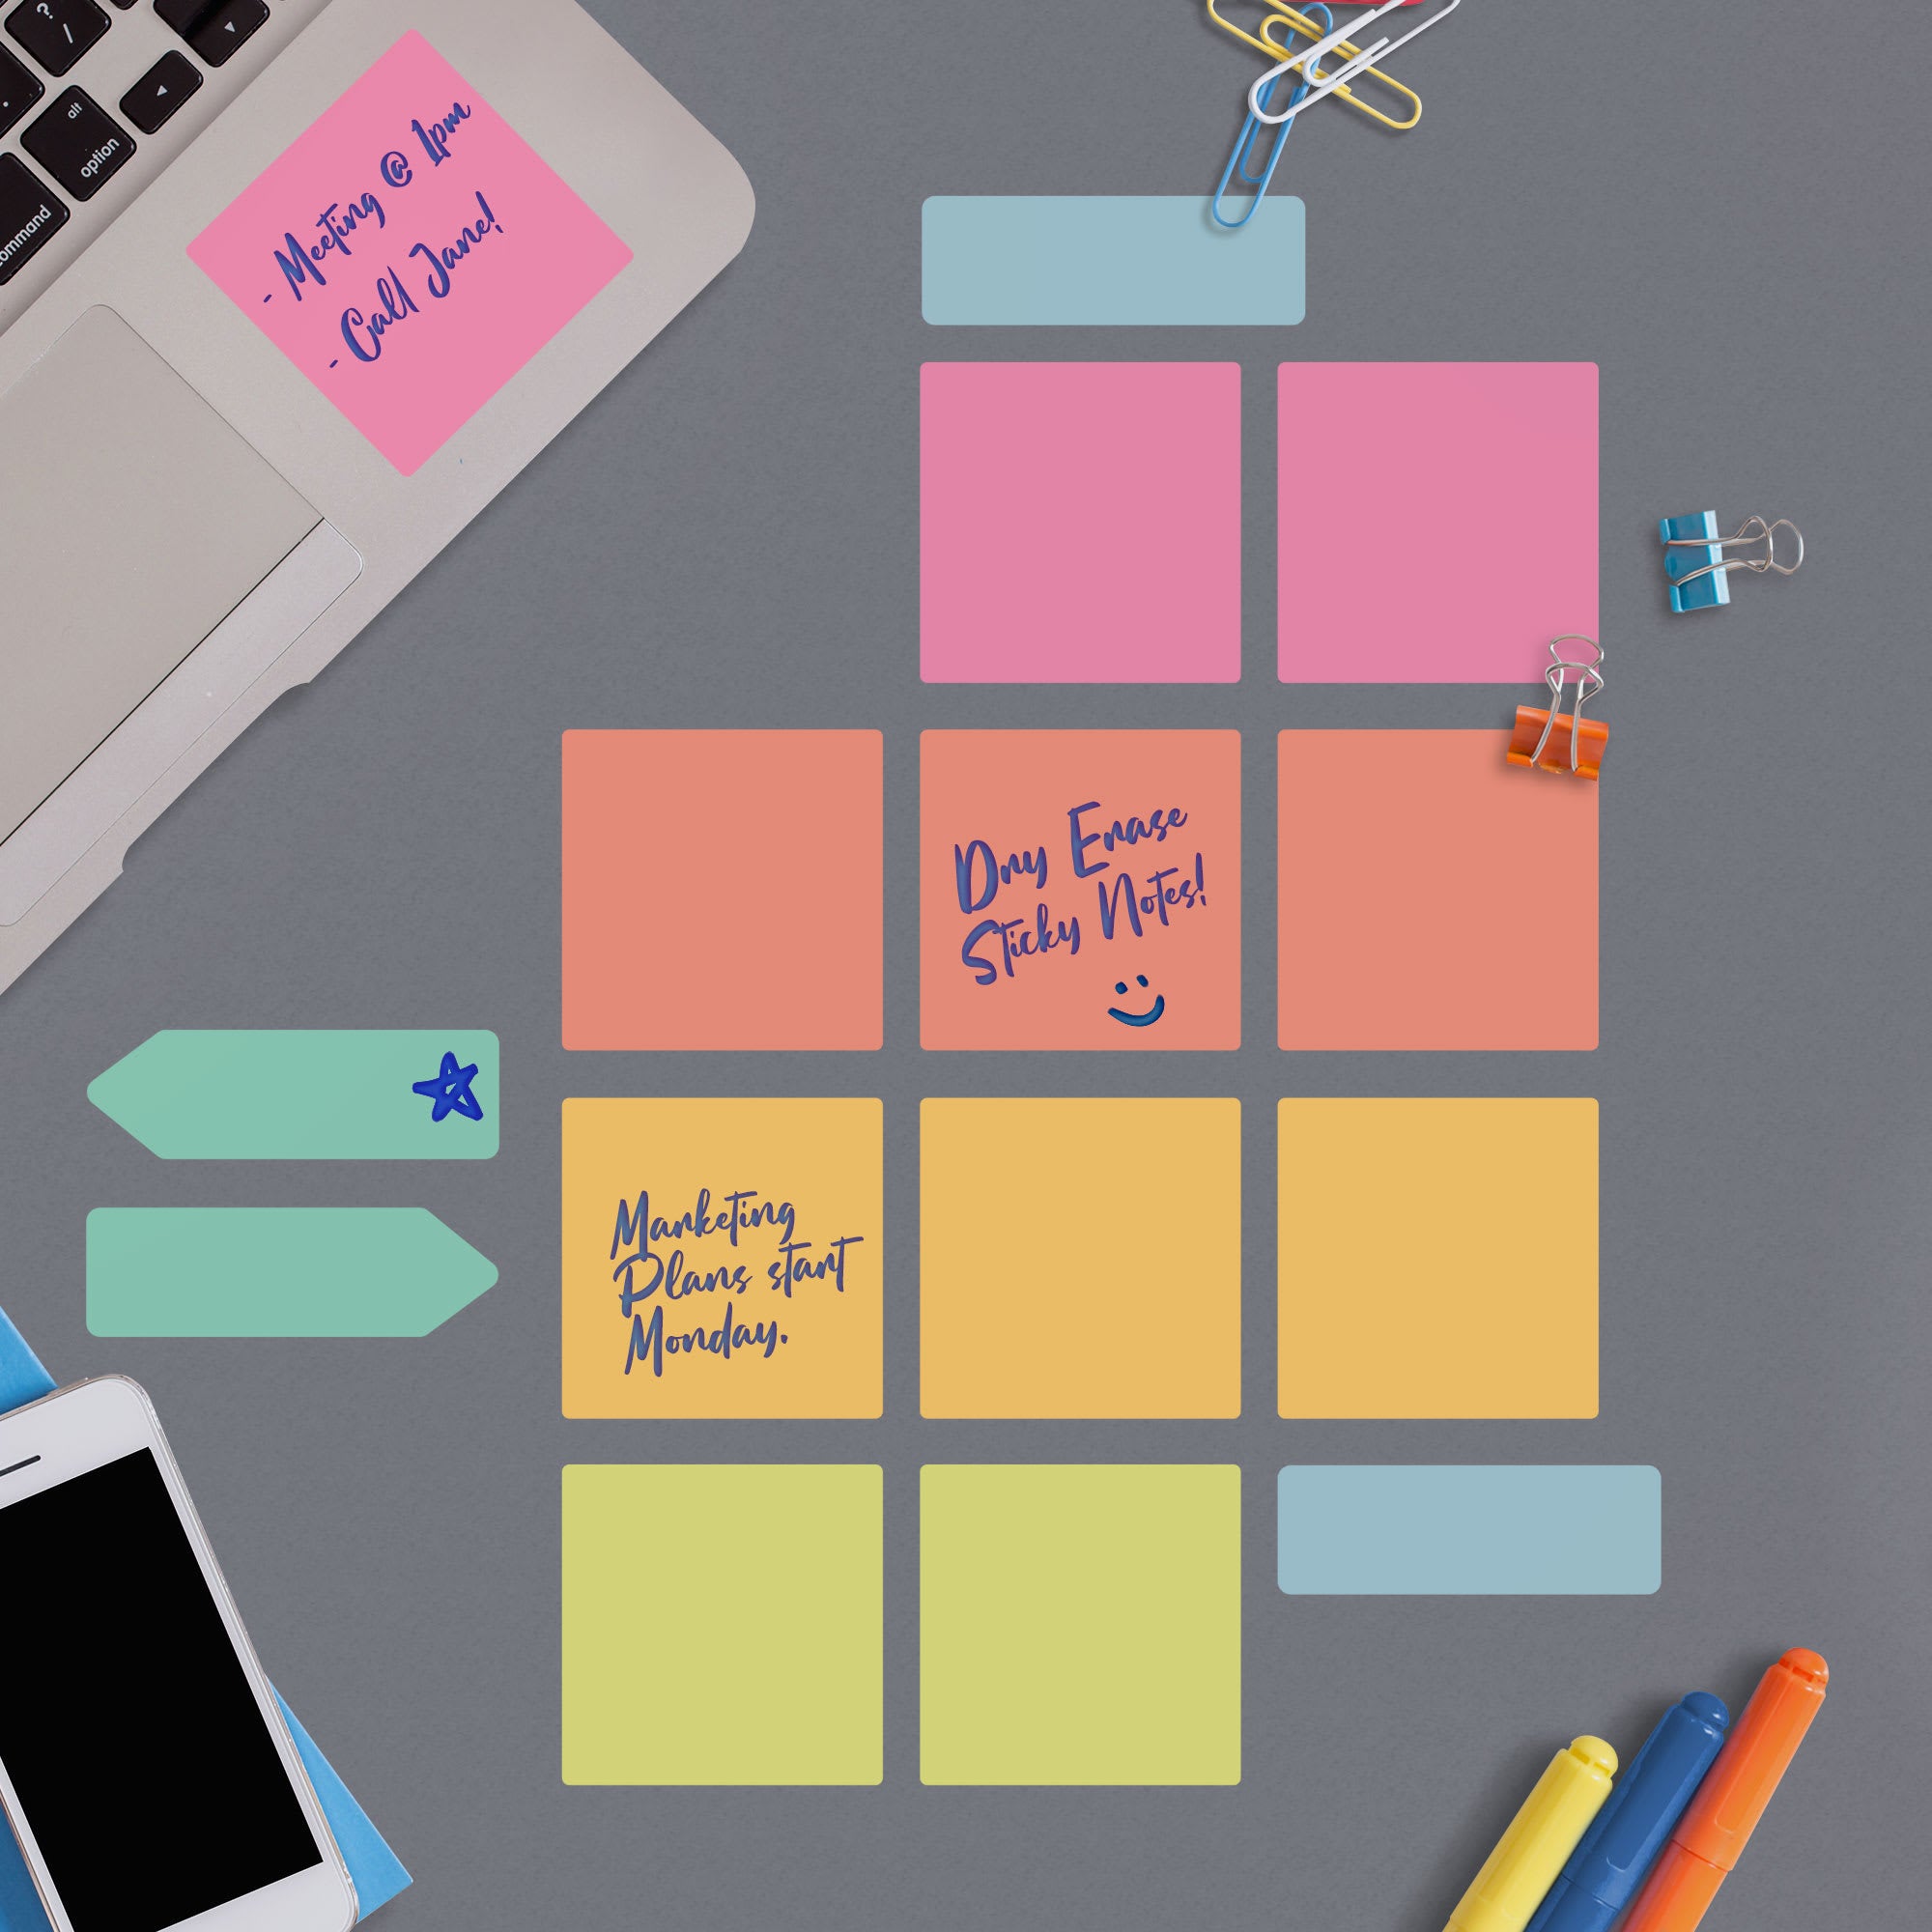 Sticky Notes: Bright - Removable Dry Erase Vinyl Decal 3.0"W x 3.0"H by Fathead